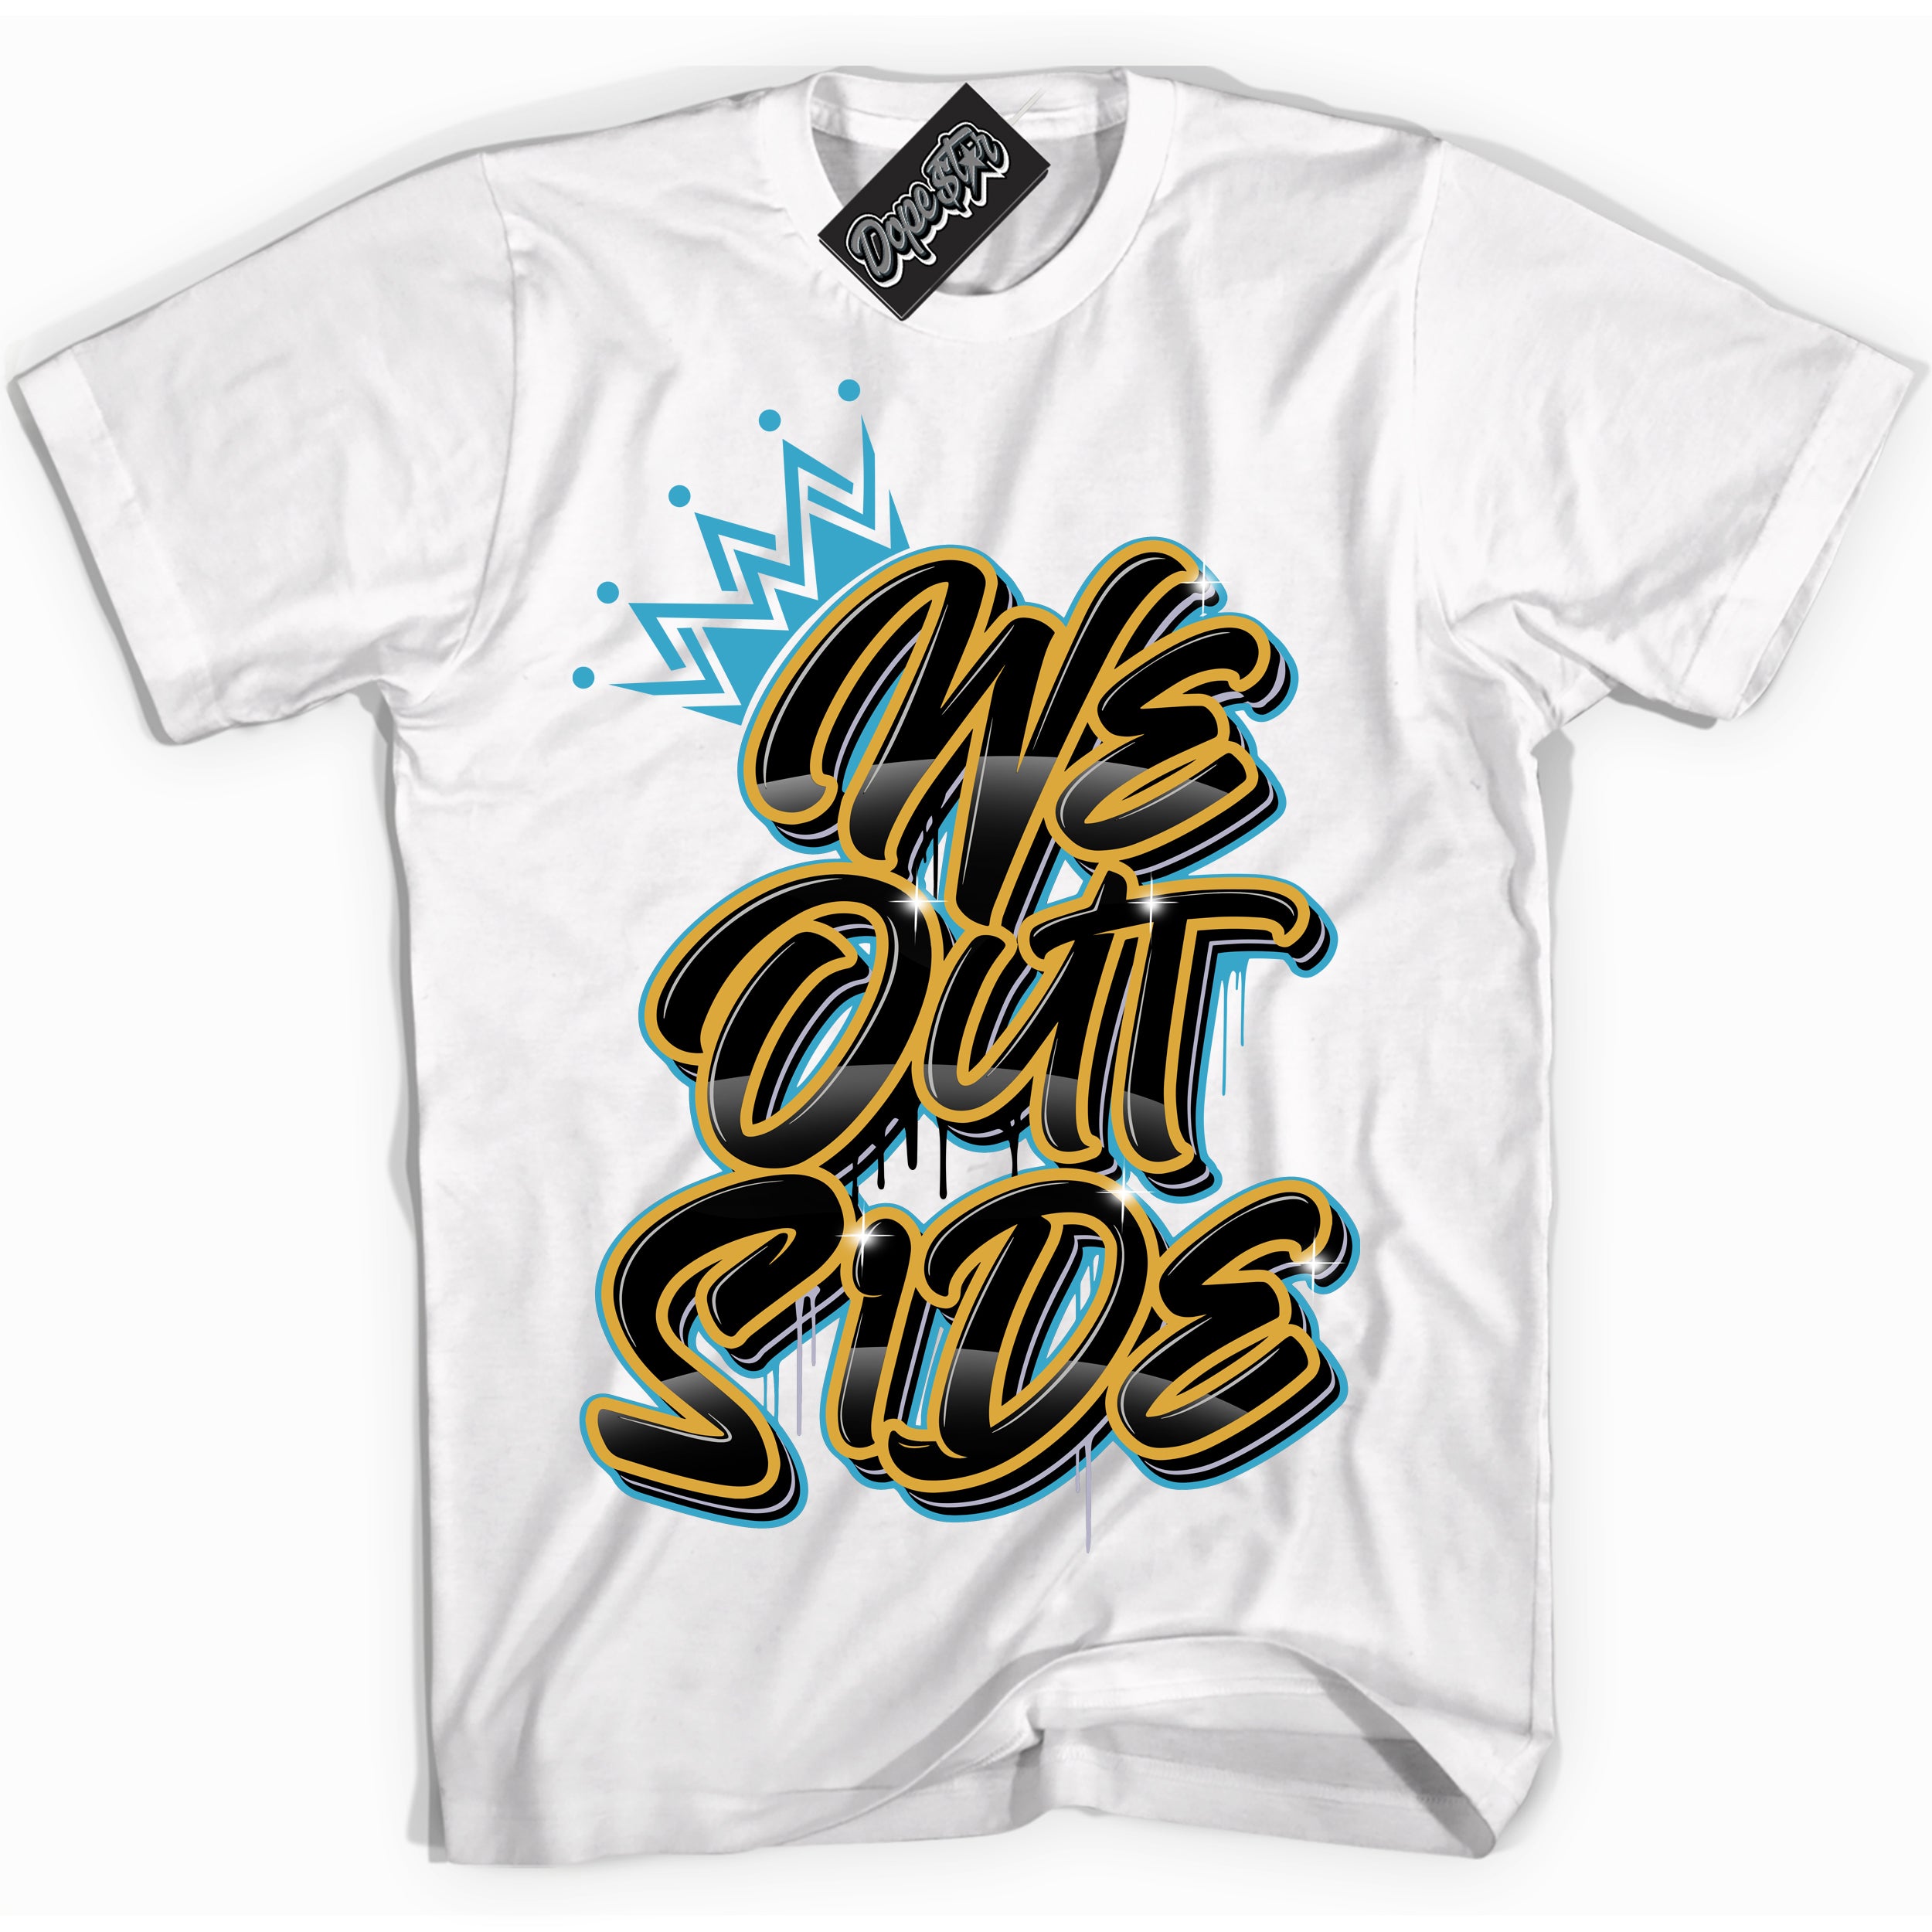 Cool White Shirt with “ We Outside” design that perfectly matches Aqua 5s Sneakers.